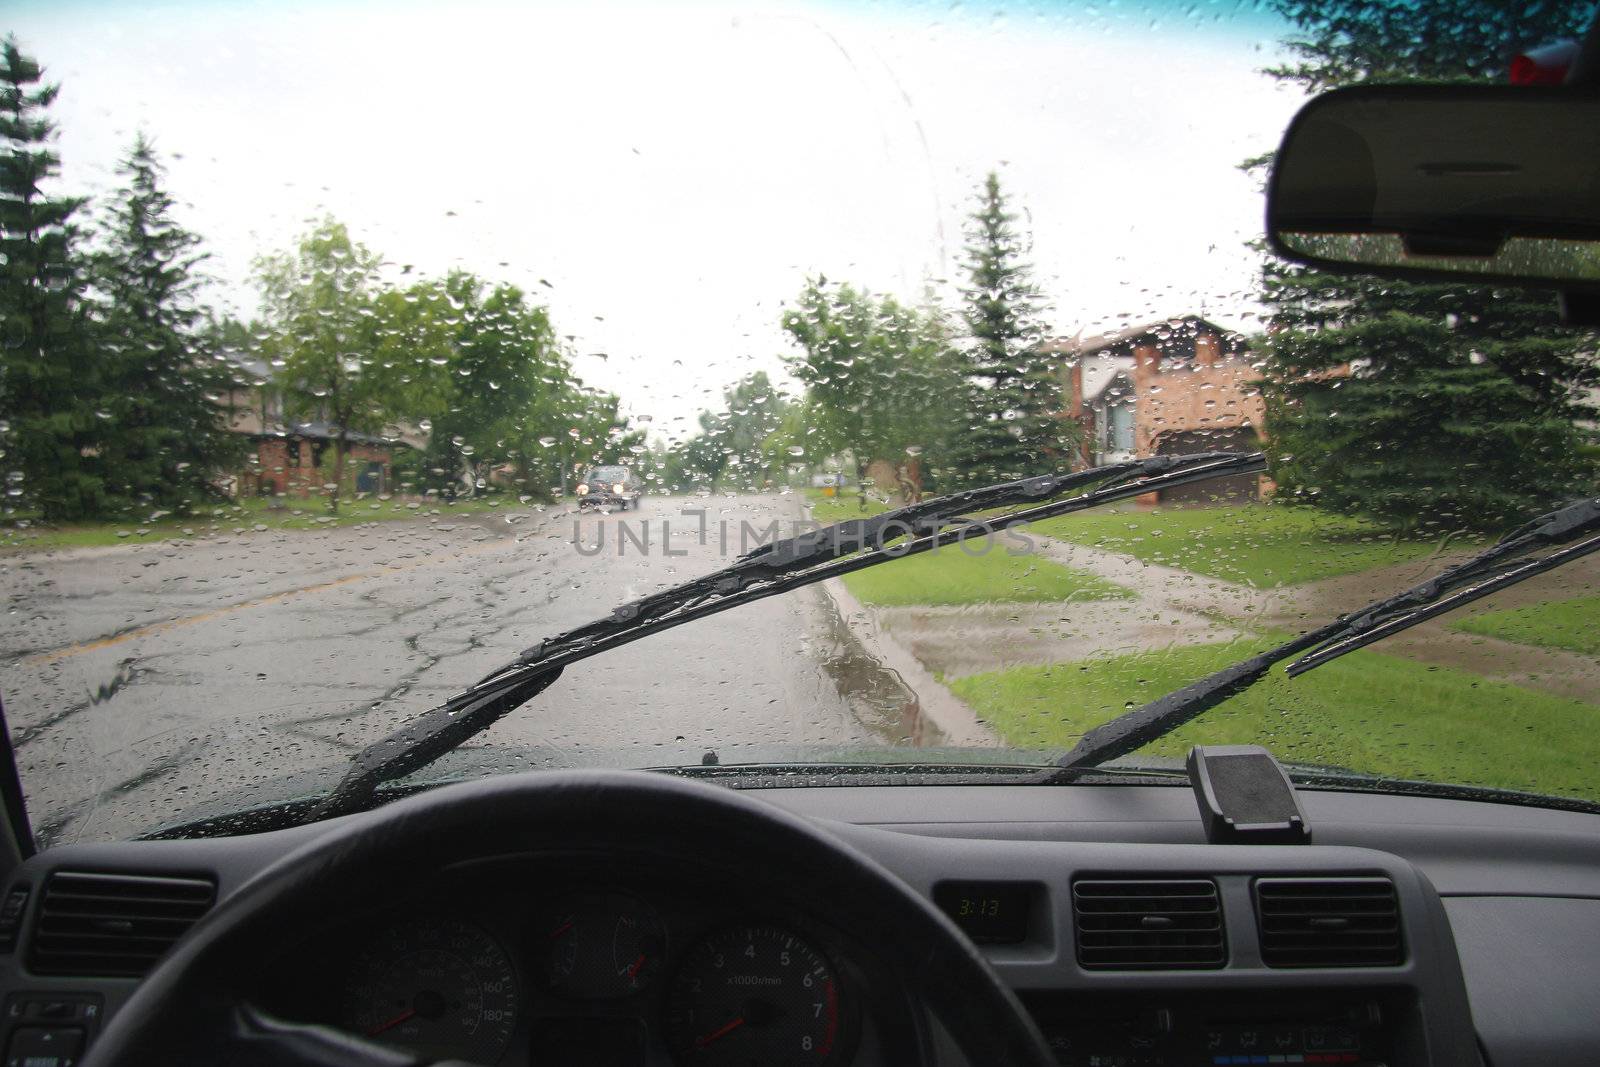 View from the drivers seat inside a car on a rainy day